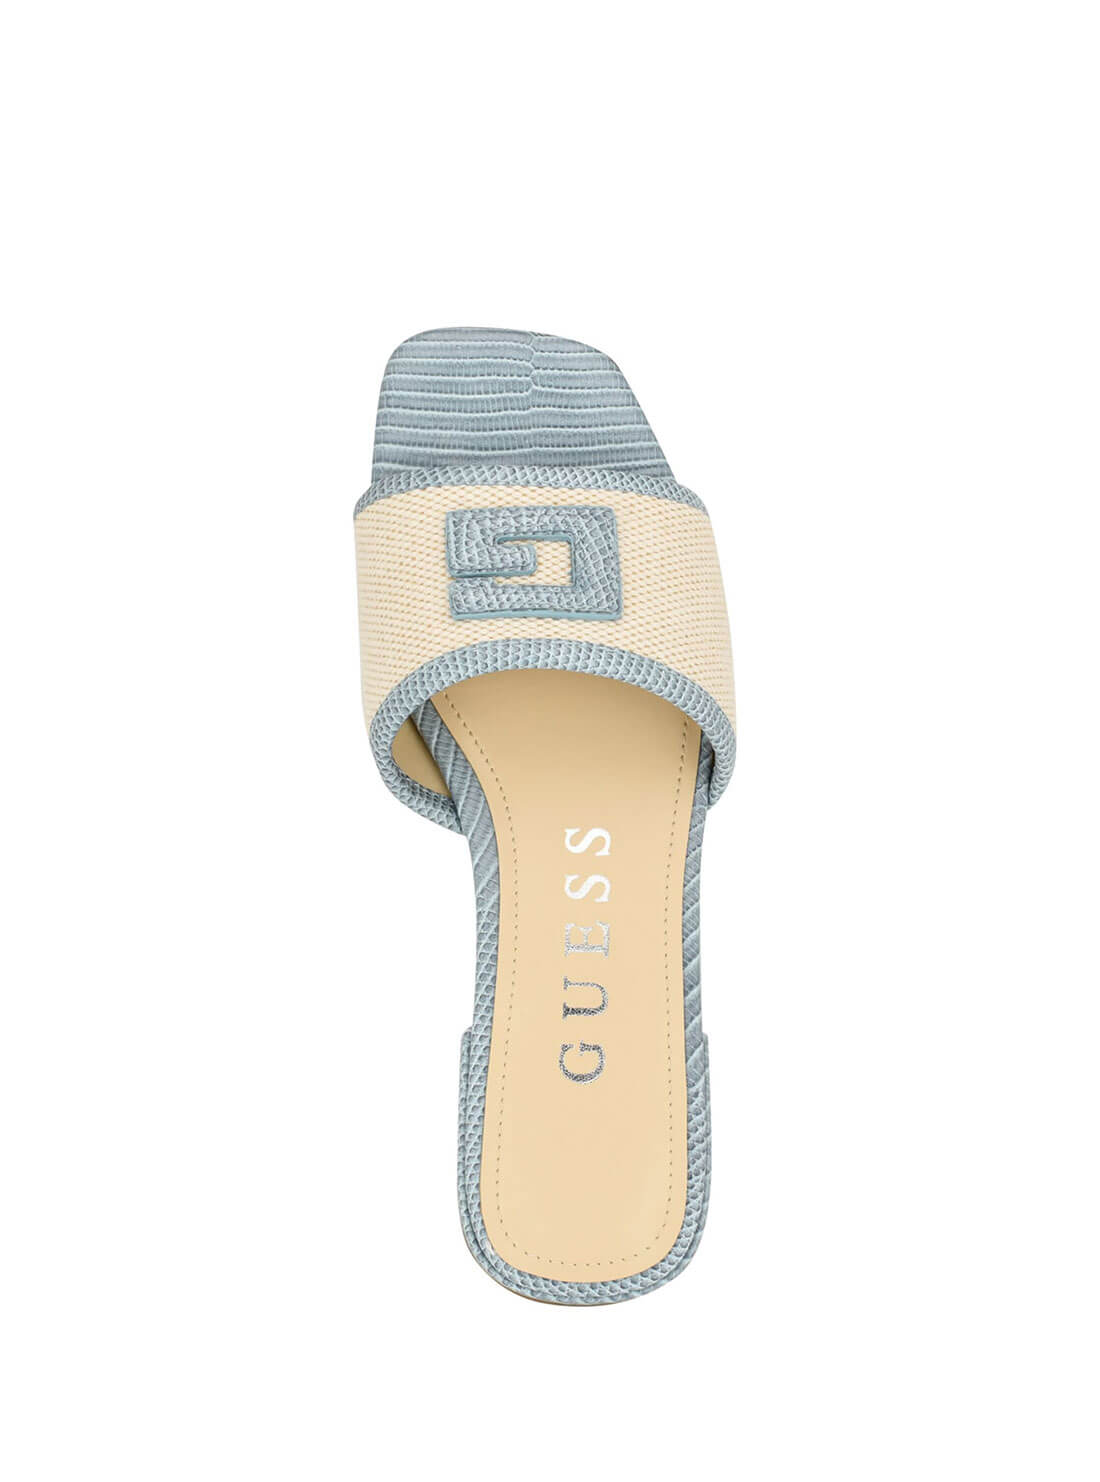 Light Blue Natural Tampa Slide Sandals | GUESS Women's Shoes | top view